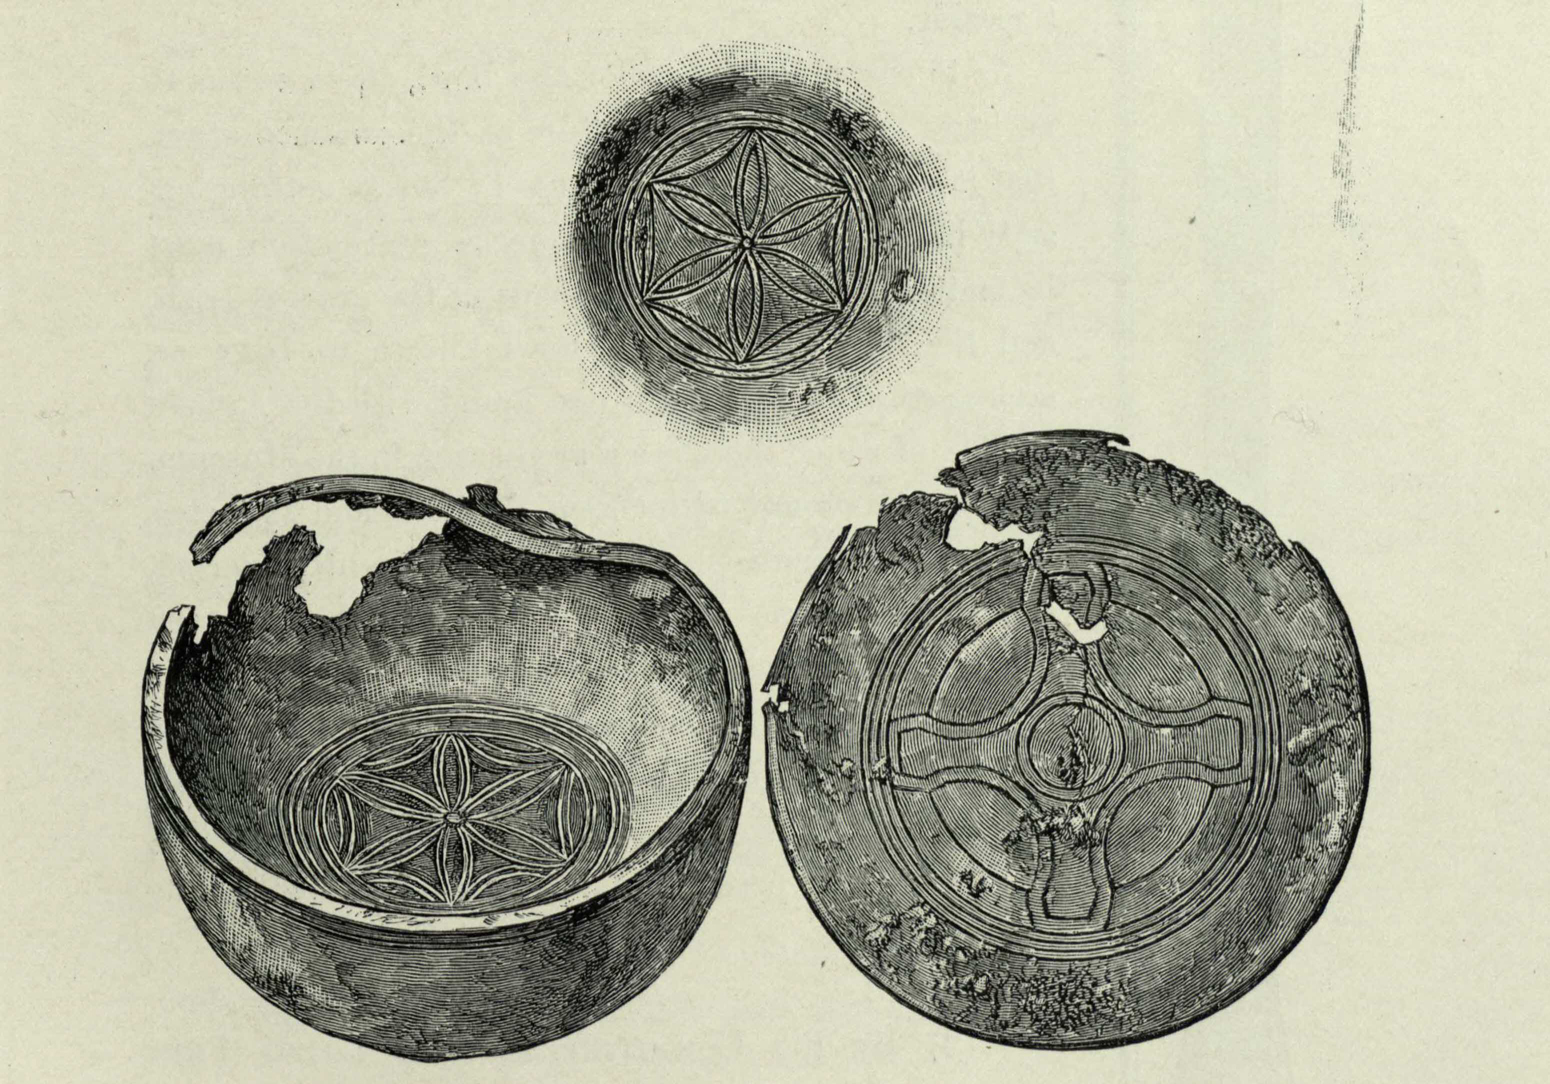 Sketch of the bronze bowl; the upper figure shows the ornament on the exterior of the bottom on the bowl. From the Proceedings of the Society of Antiquaries of Scotland, v.33, p.77 (St Andrews copy at rper DA750.S7P8).